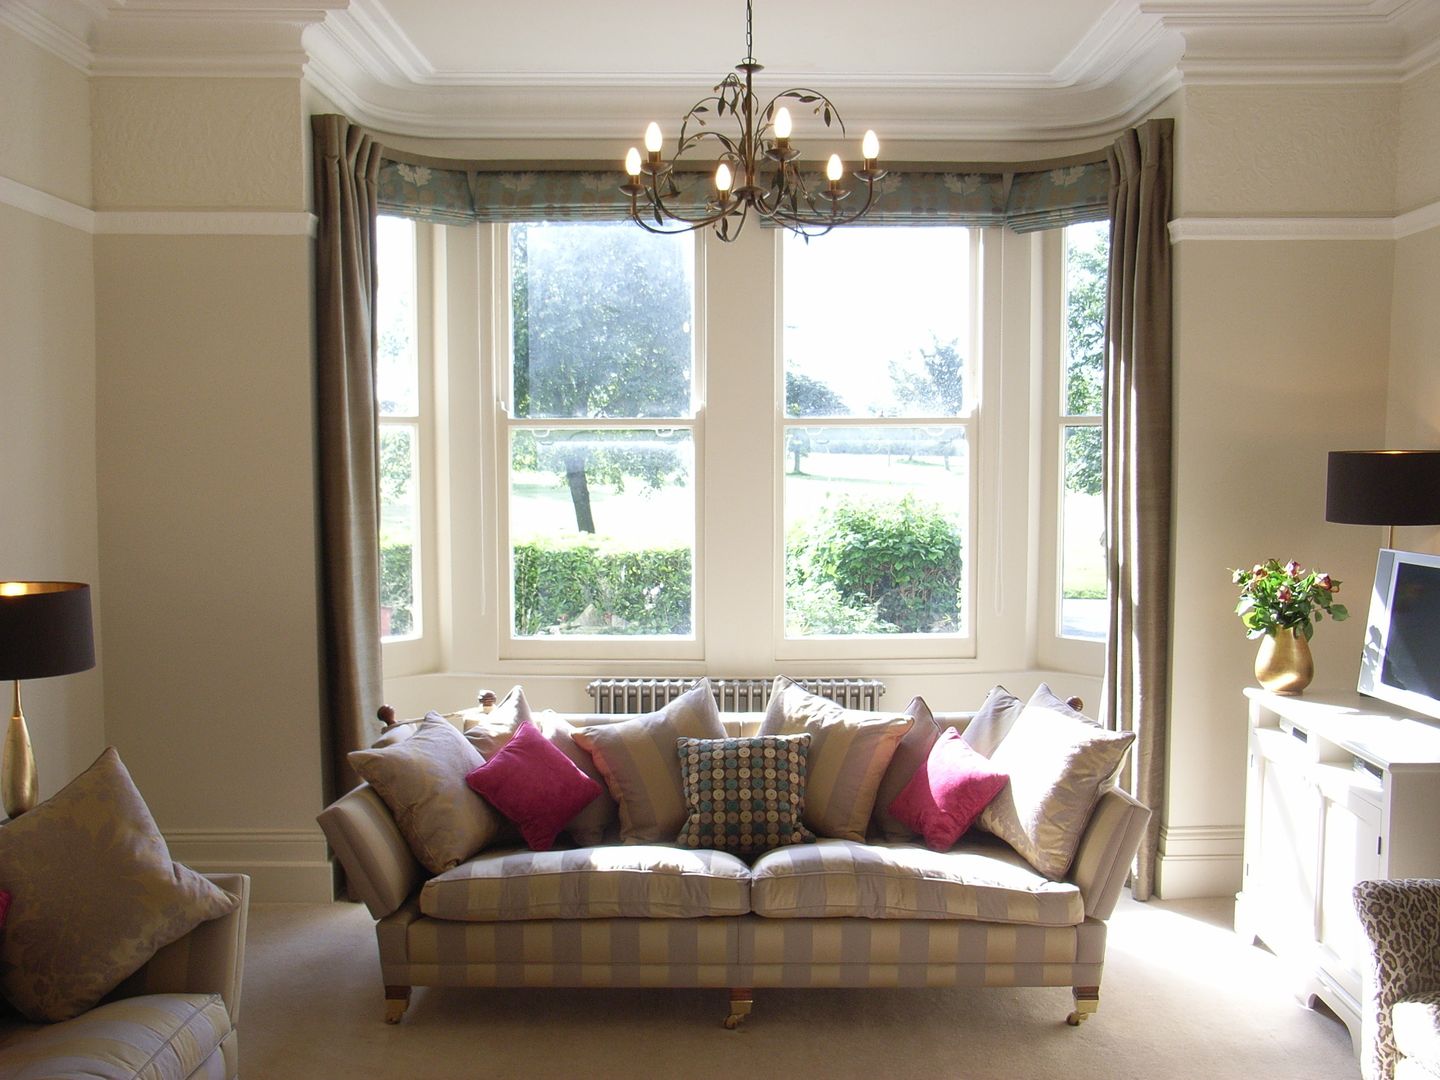 Classic View of Contemporised Victorian Living Room homify Soggiorno classico large bay window,roman blinds,dress curtains,victorian home,victorian property,classic sofa,large sofa,taupe colour scheme,pink accents,living room decor,living room furnish